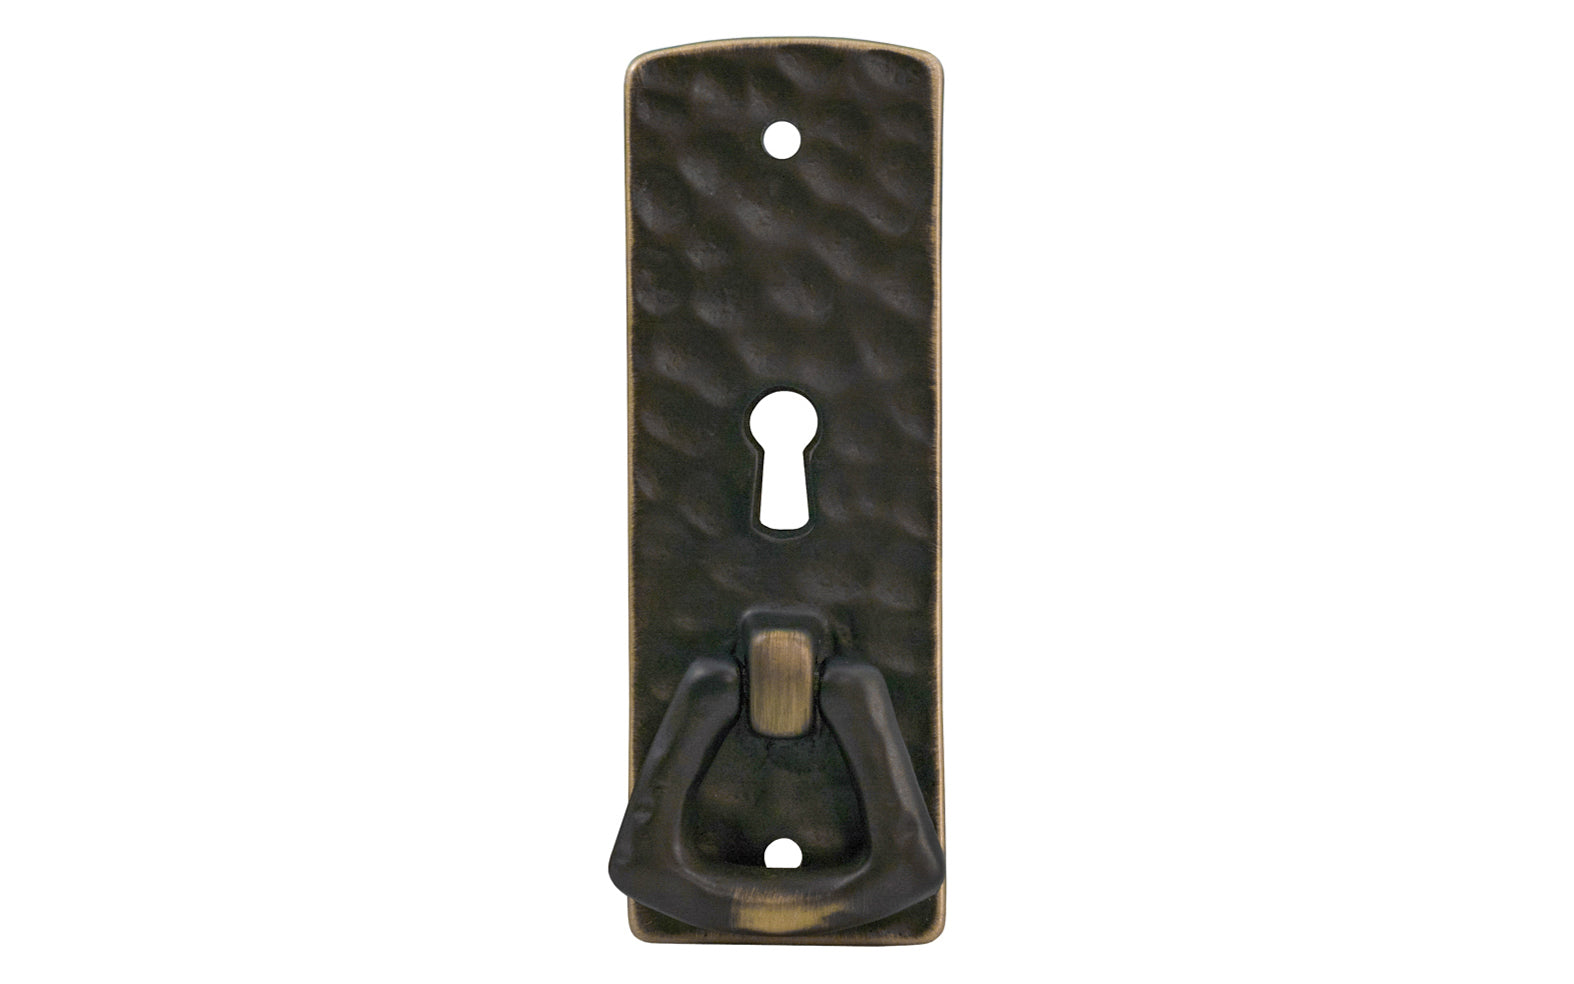 Vintage-style Hardware · Solid Brass Hammered Keyhole & Drop Pull. The finger pull has a hammered surface that gives a rustic & stylish look. Designed in the Mission or Arts & Crafts style, Gustav Stickley style hardware. Antique brass finish trim 